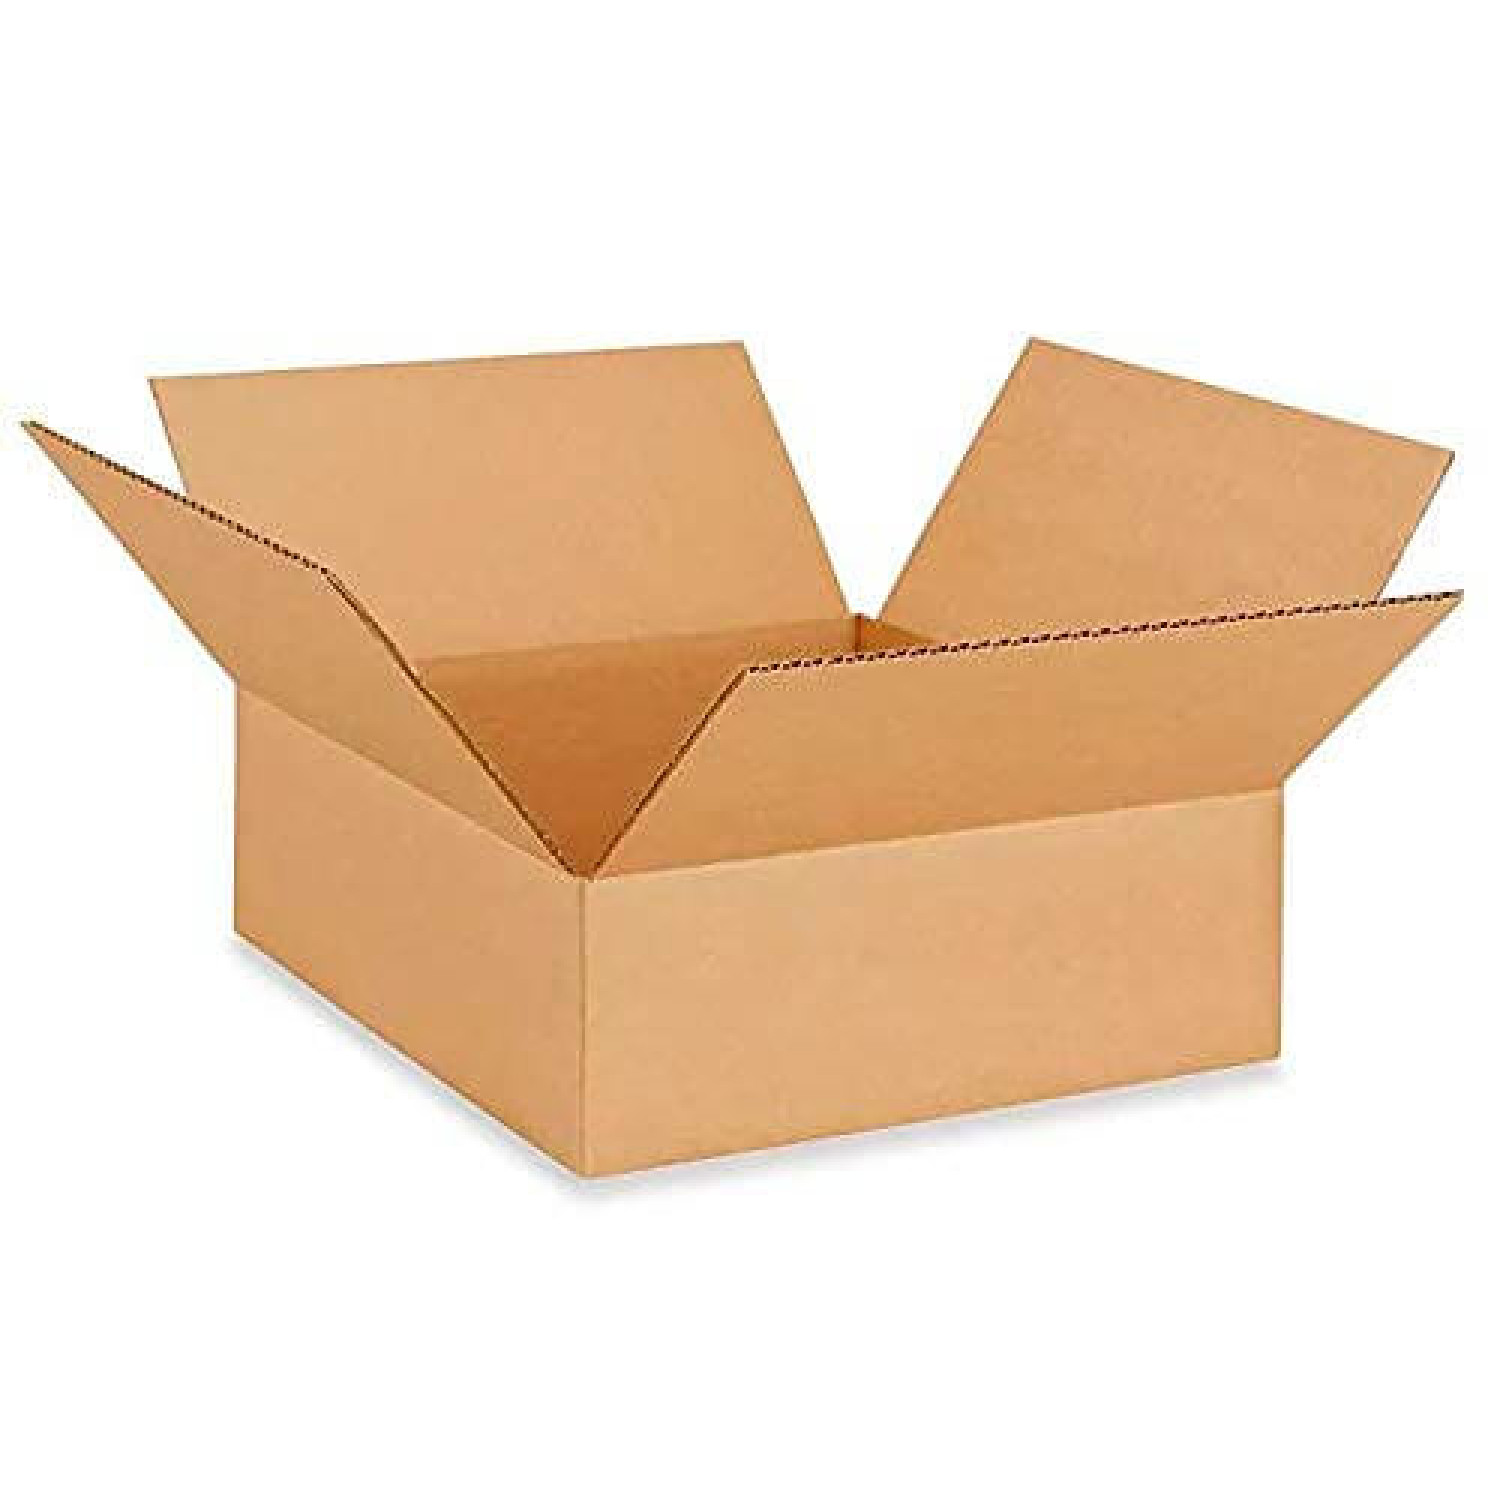 Small Boxes In USA, Recycled Packing Boxes Heavy Duty